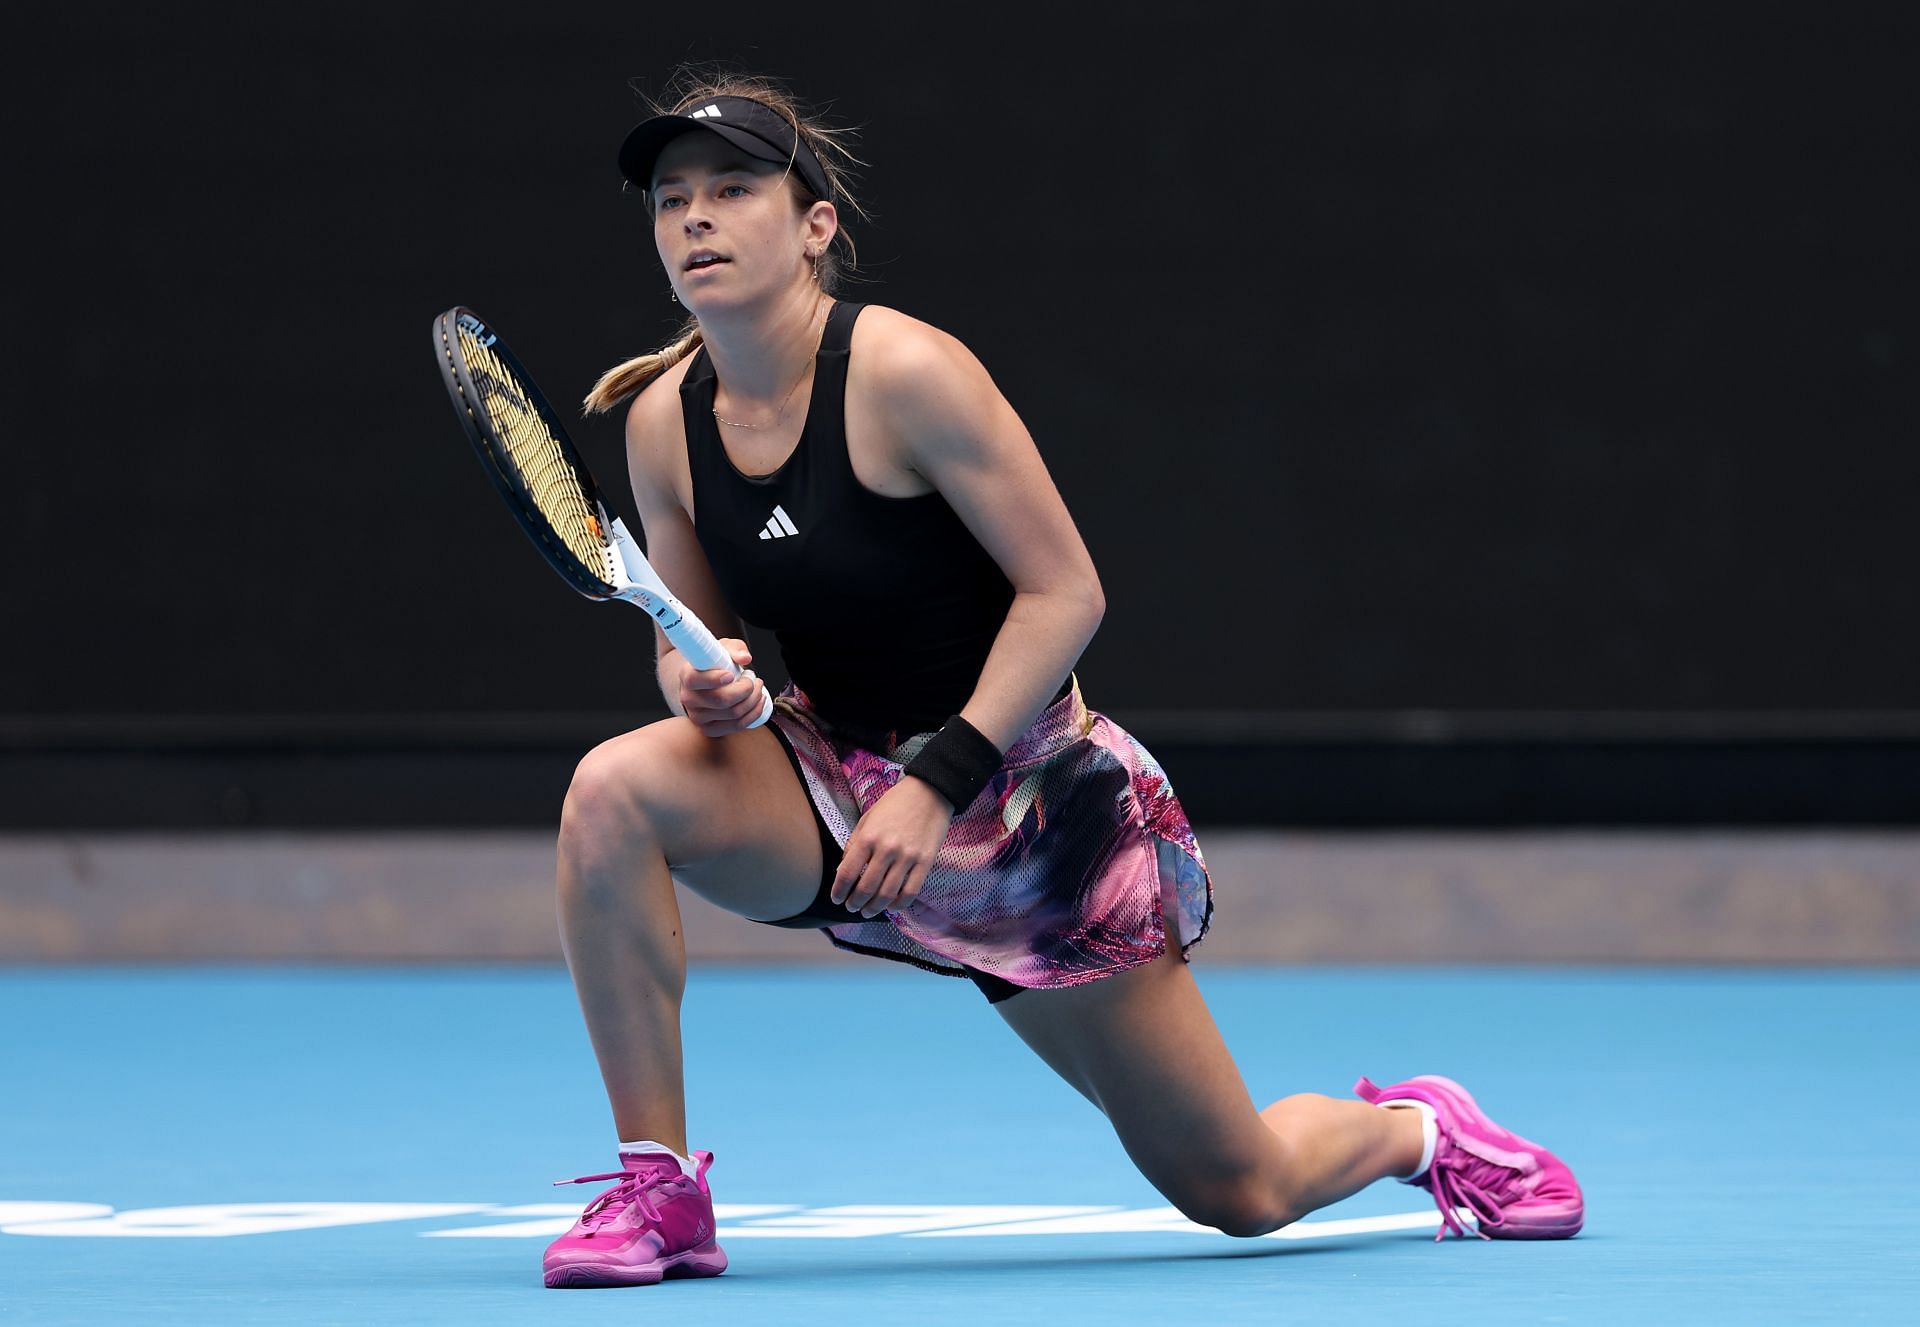 Katie Volynets in action at the Australian Open 2023